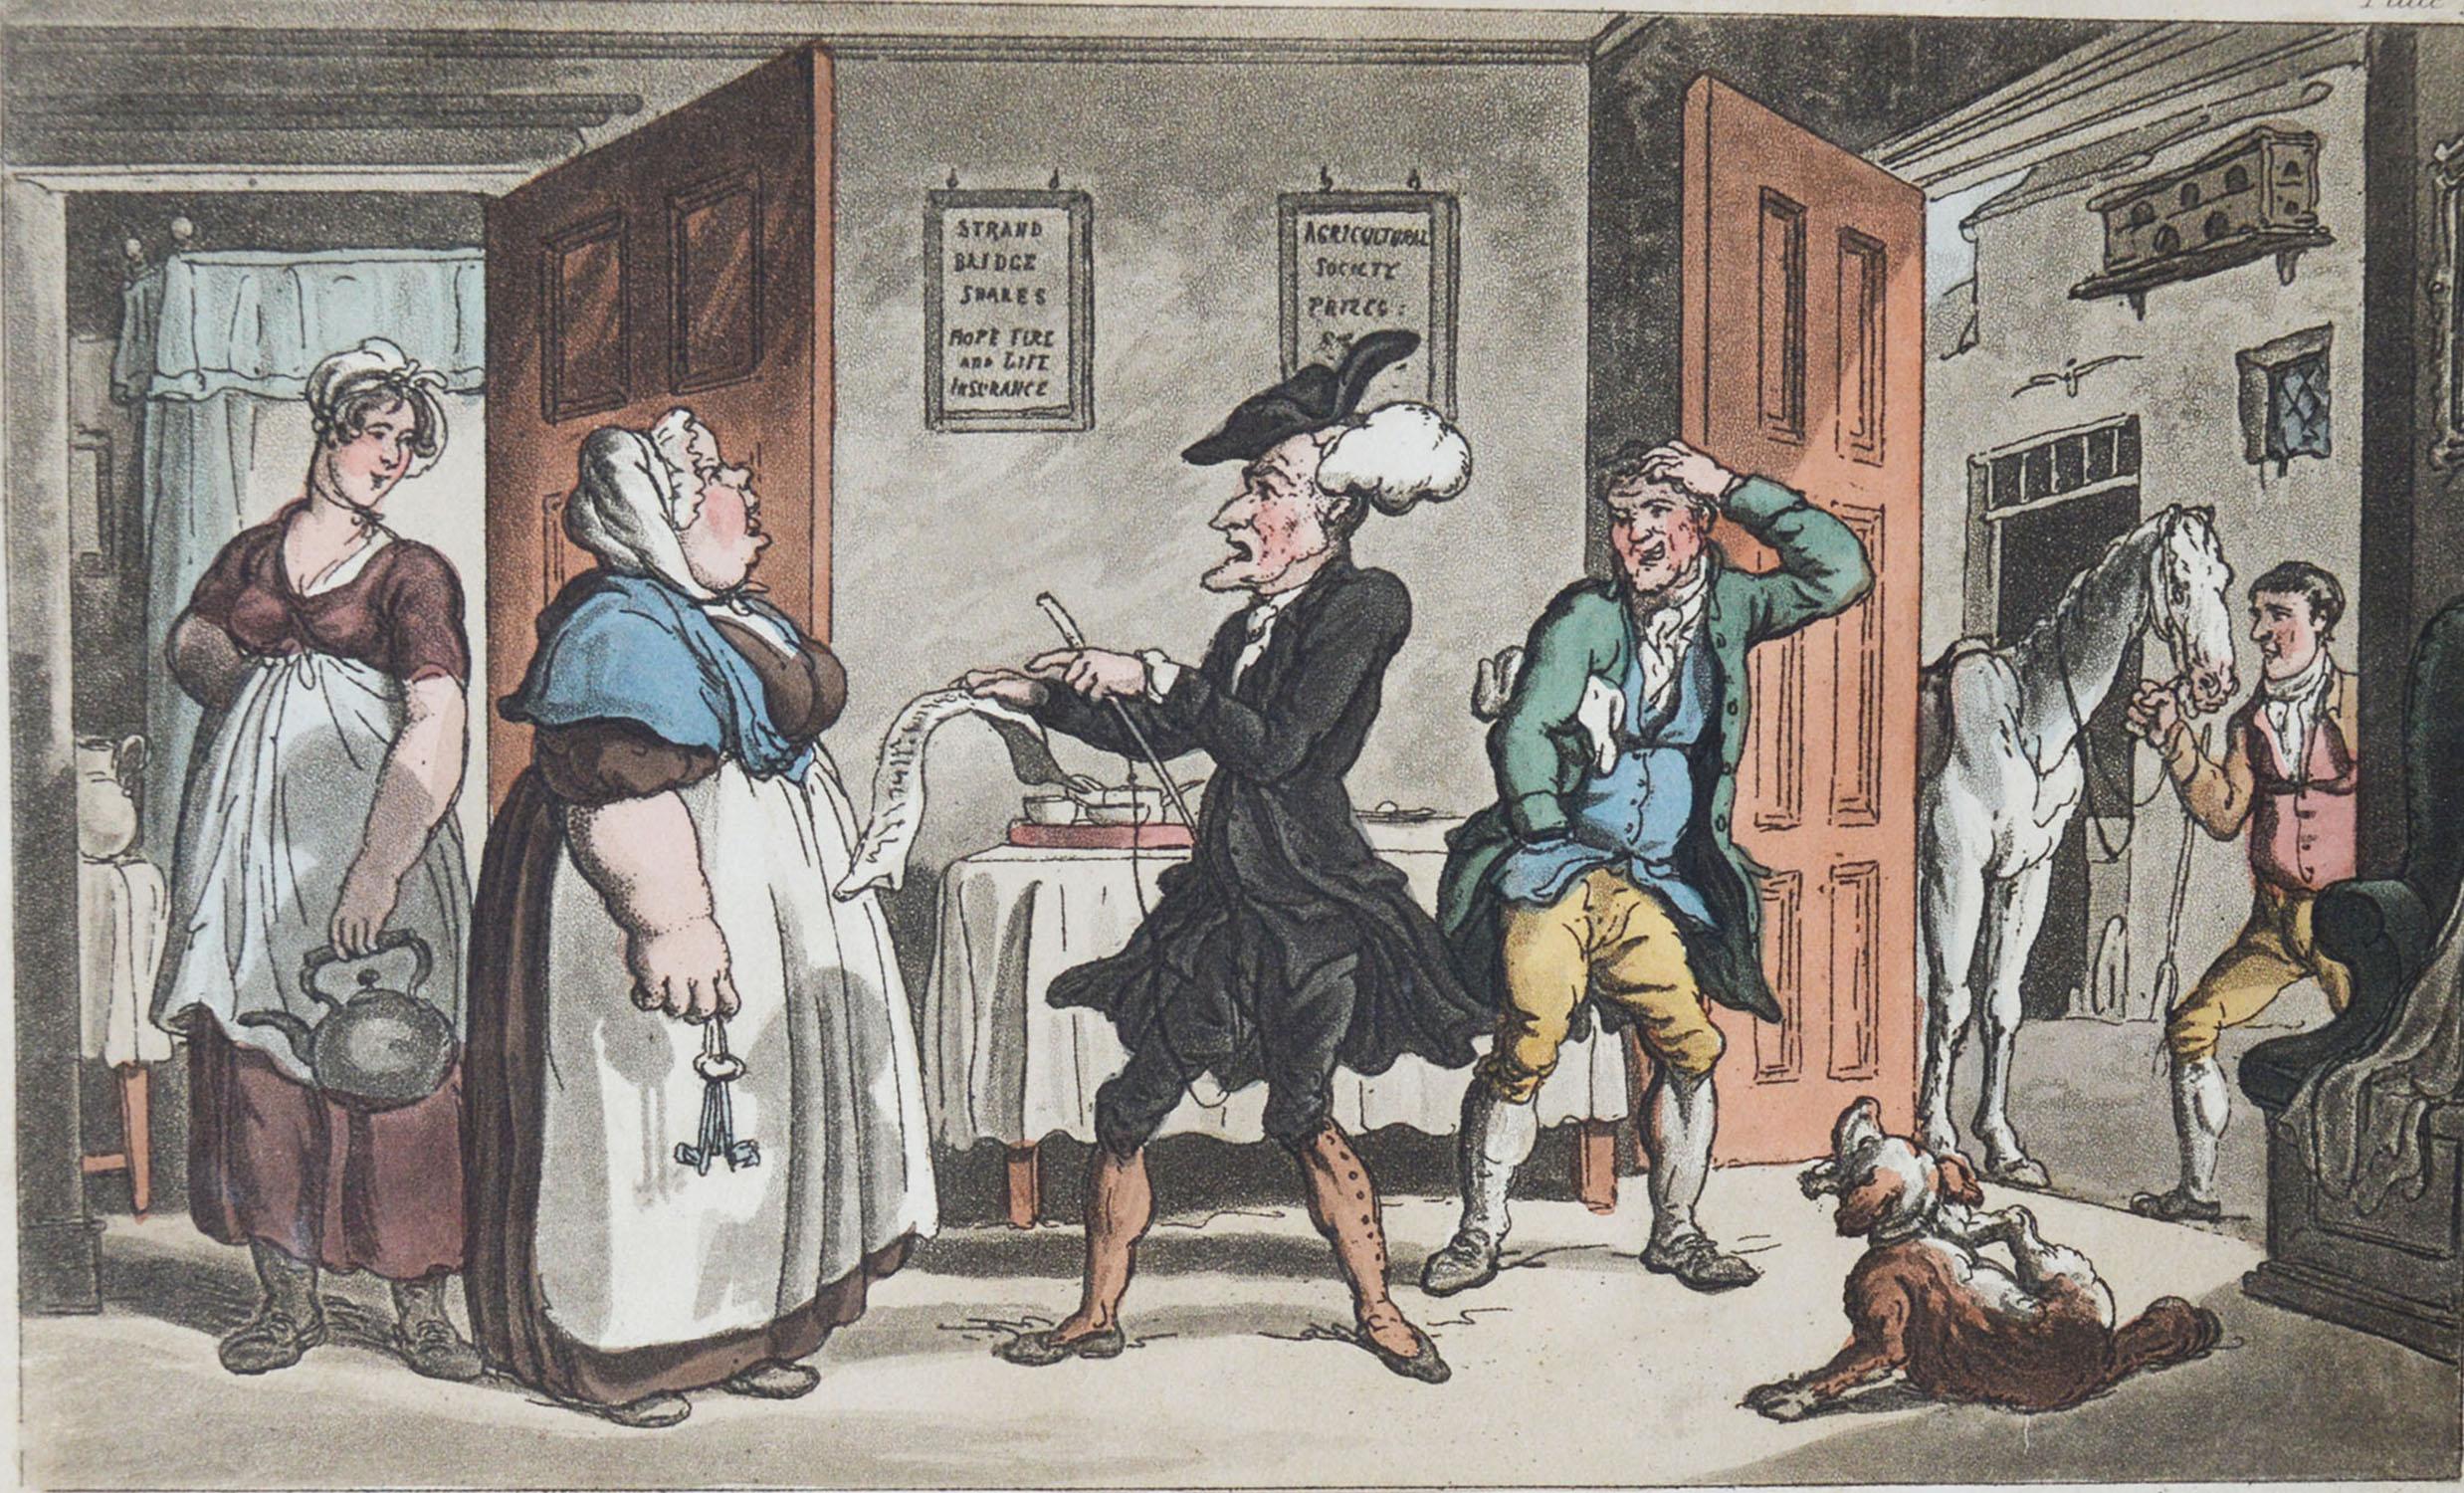 Great image by Thomas Rowlandson from the 